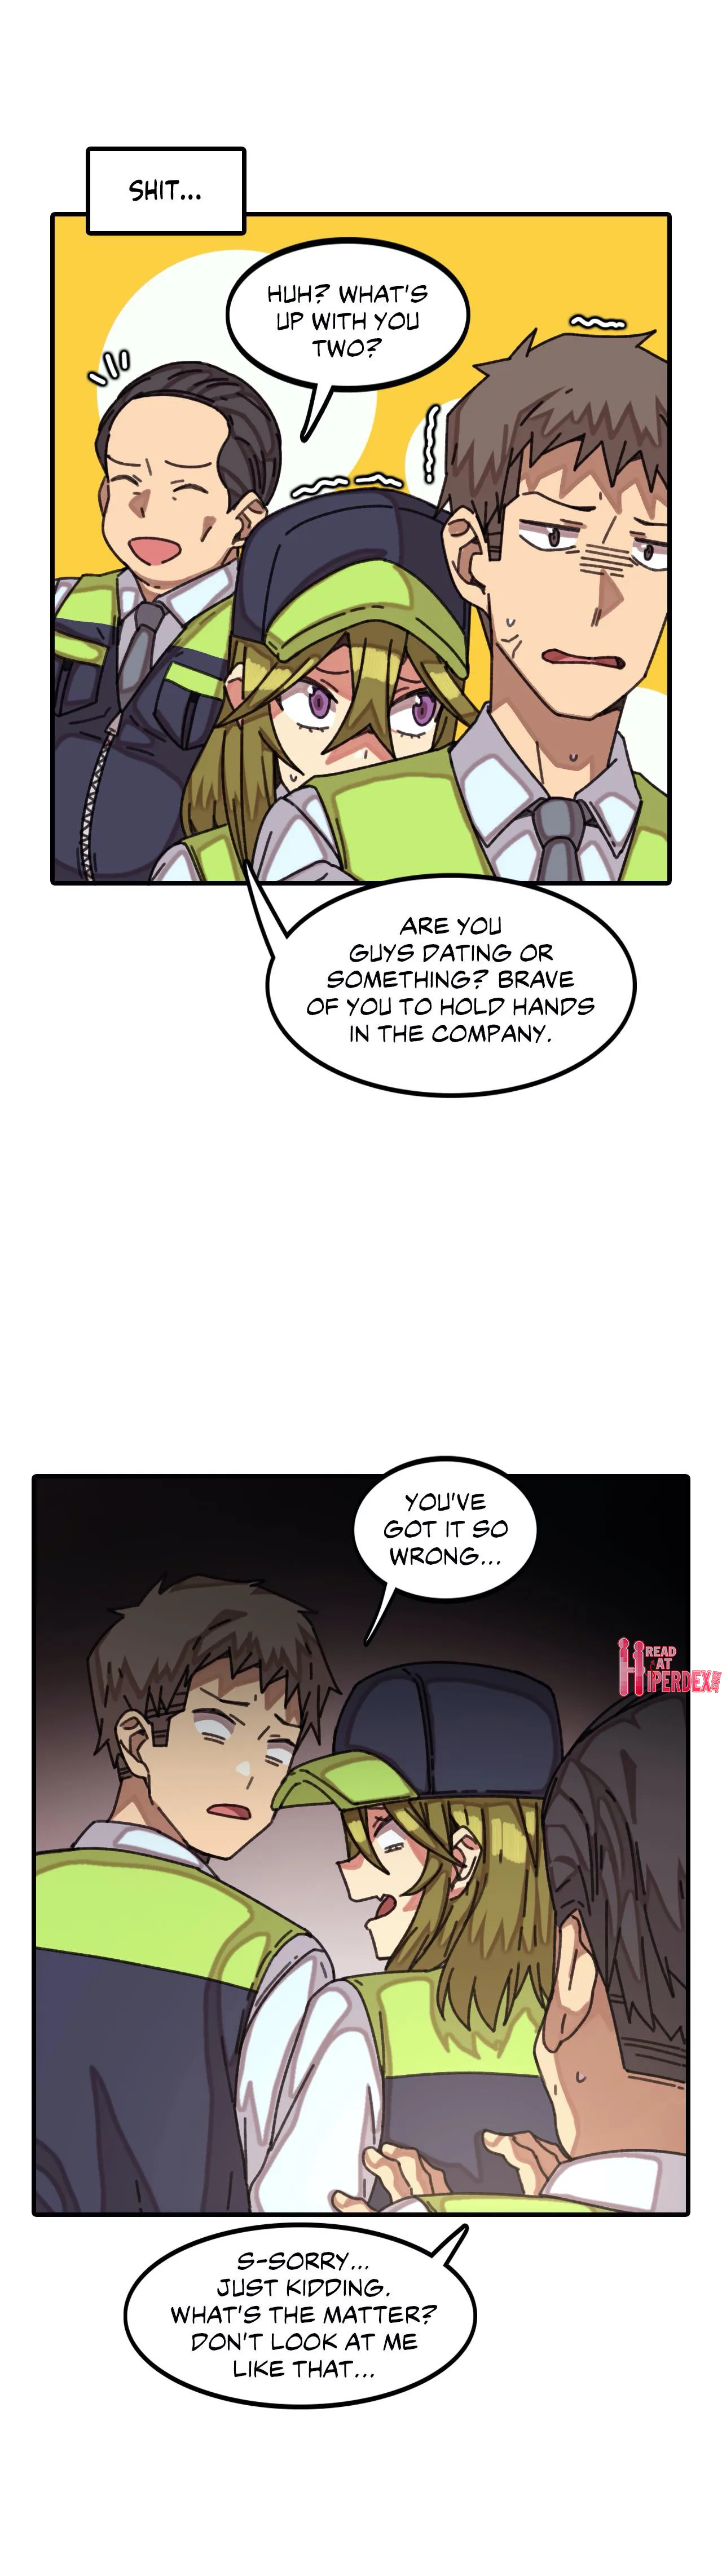 The Girl That Lingers in the Wall - Chapter 23 Page 6